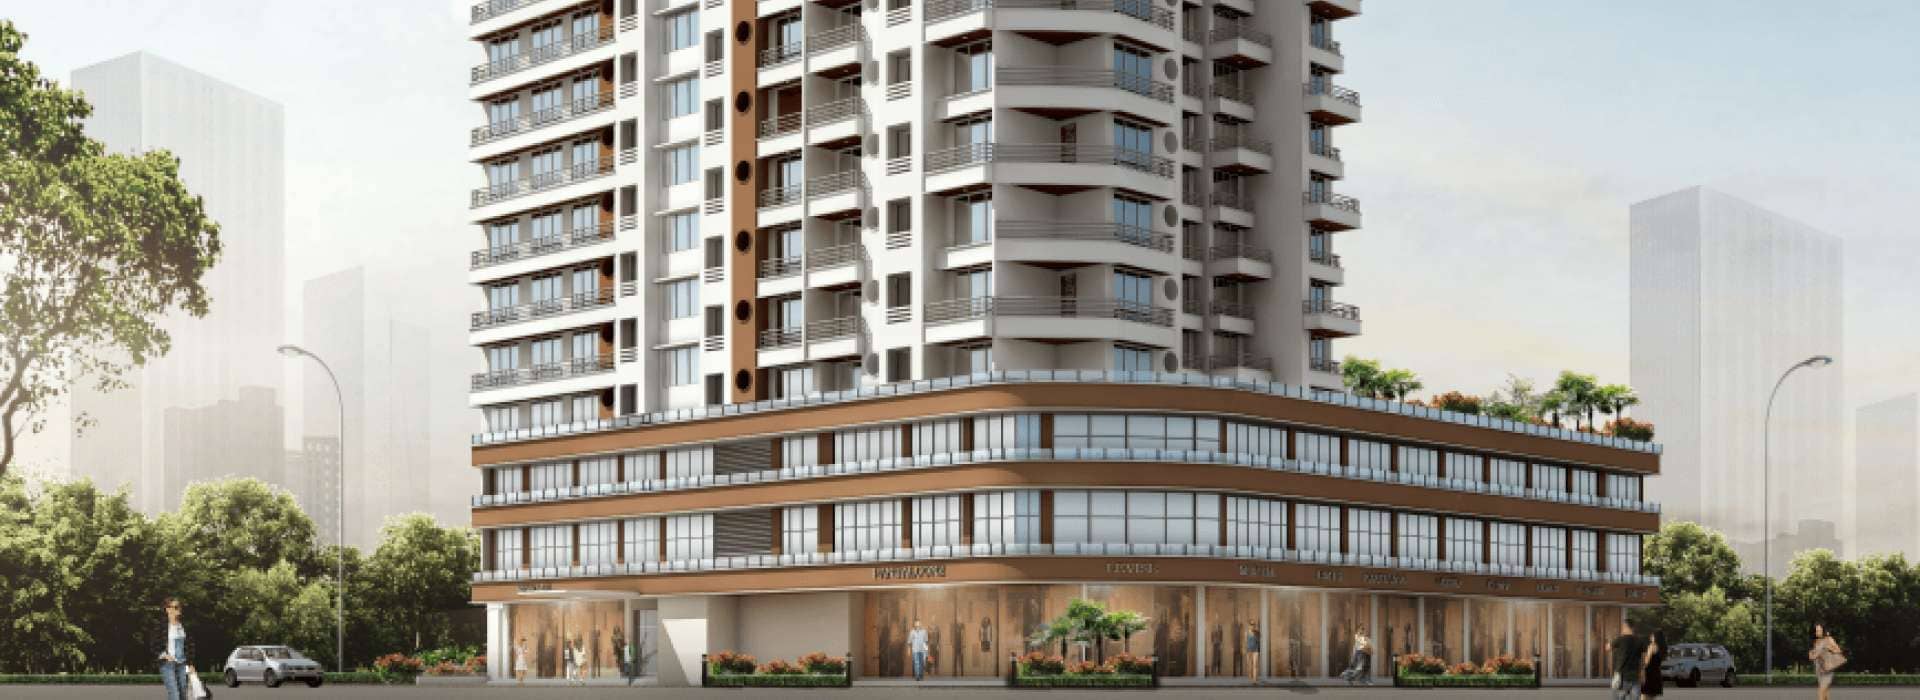 Tycoons Group launches integrated lifestyle district 'Tycoons Square' in  Kalyan